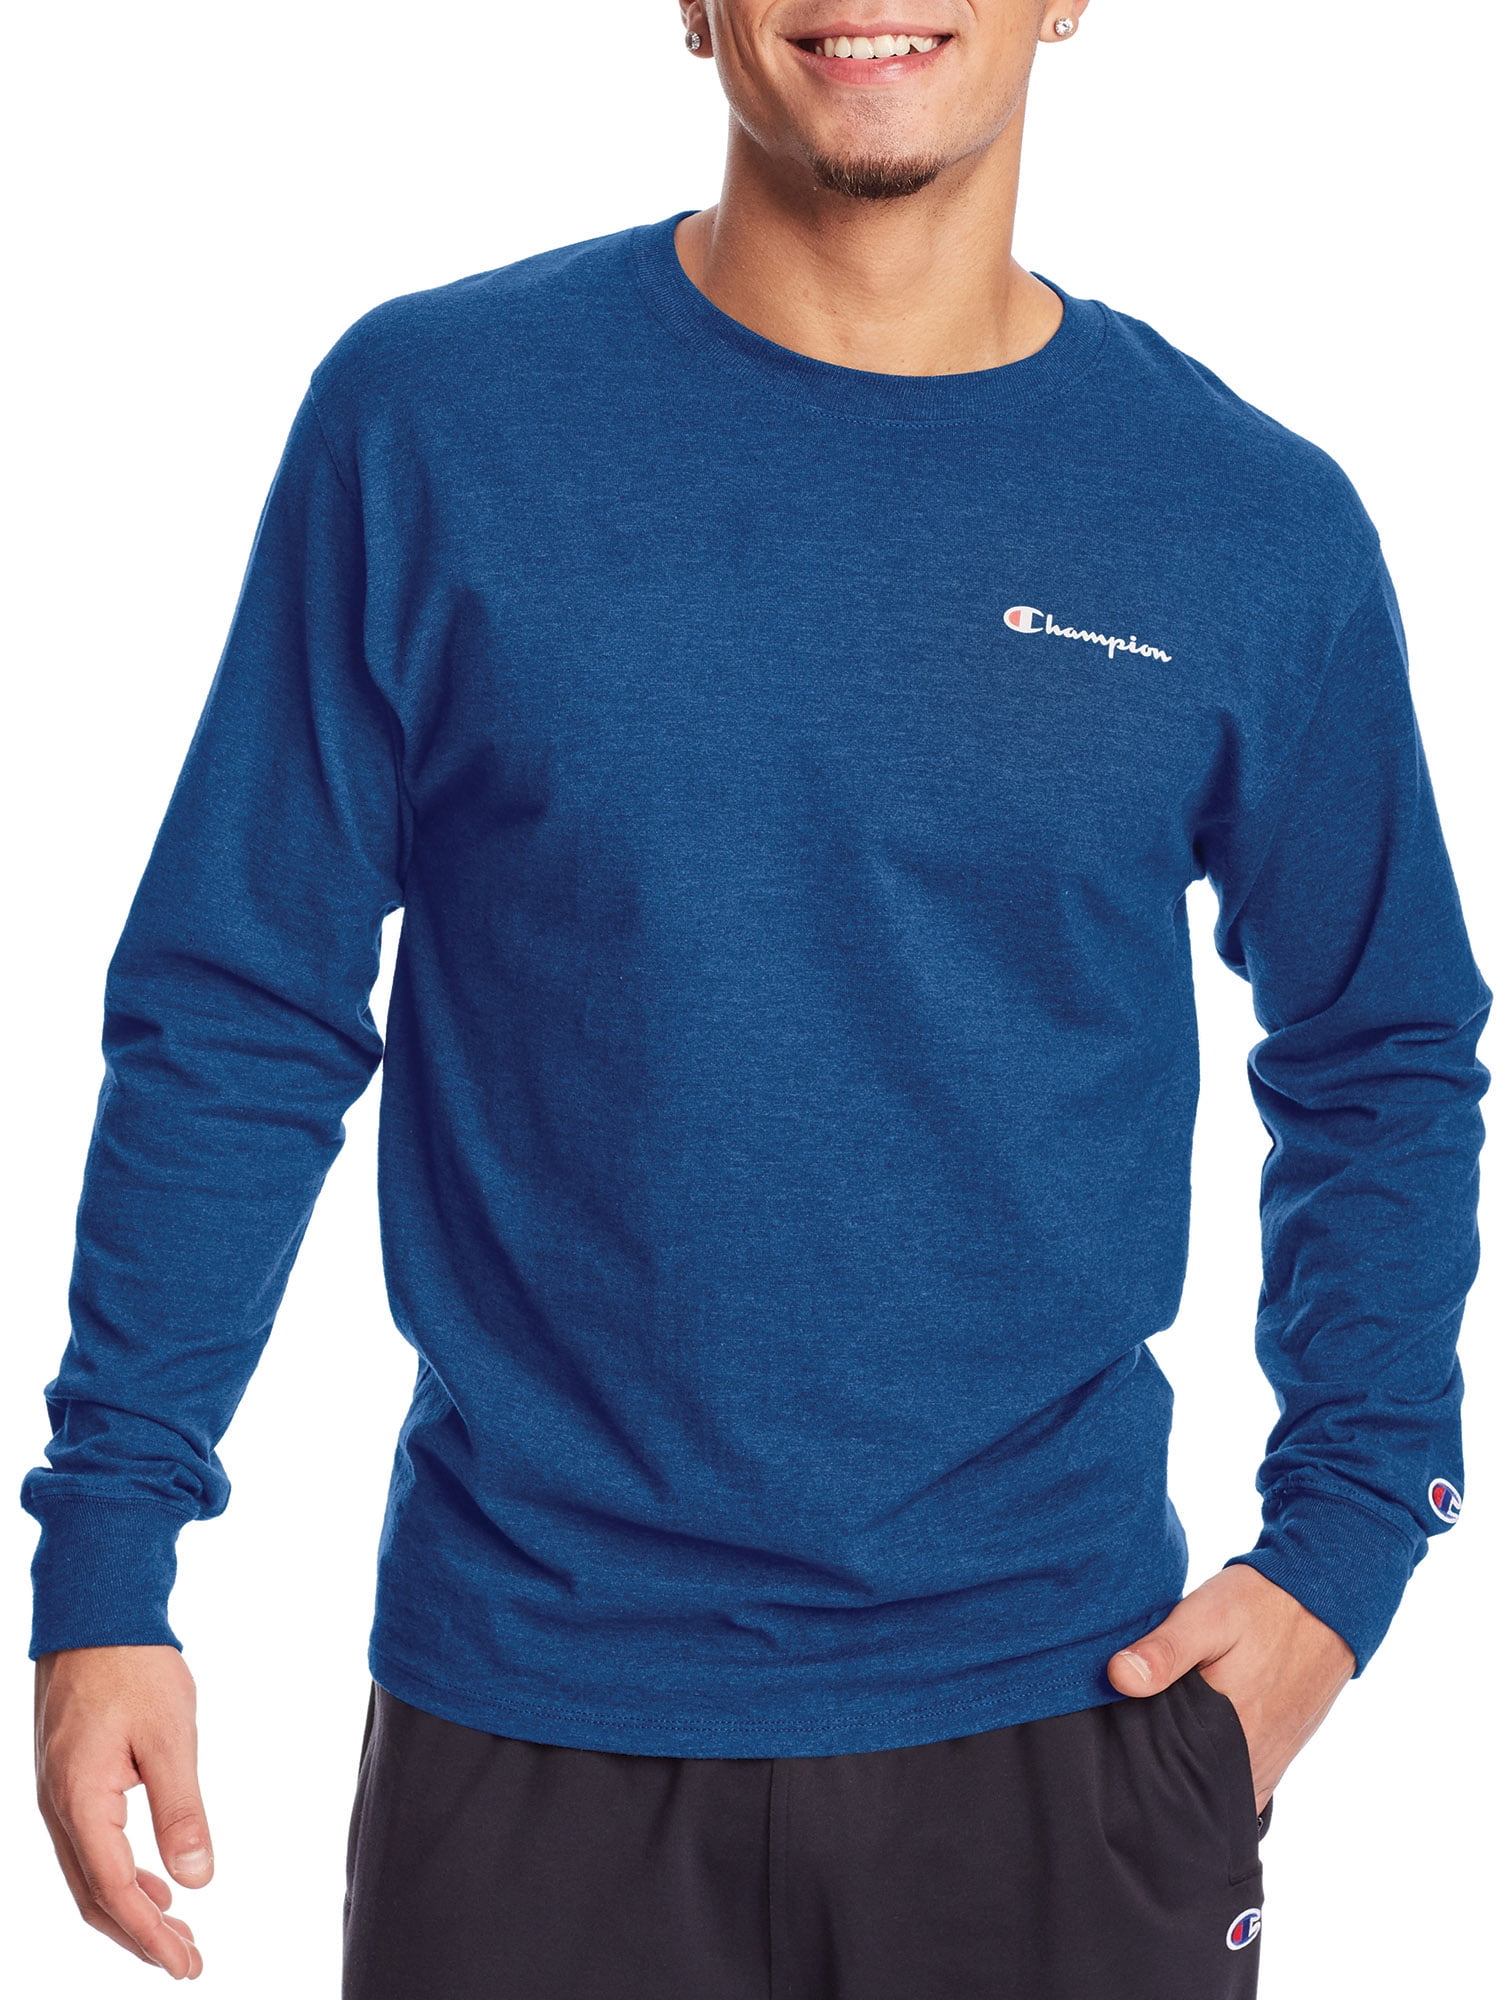 Huck It Mens Classic-Fit Long-Sleeve Crewneck Cotton Graphic Top Tee